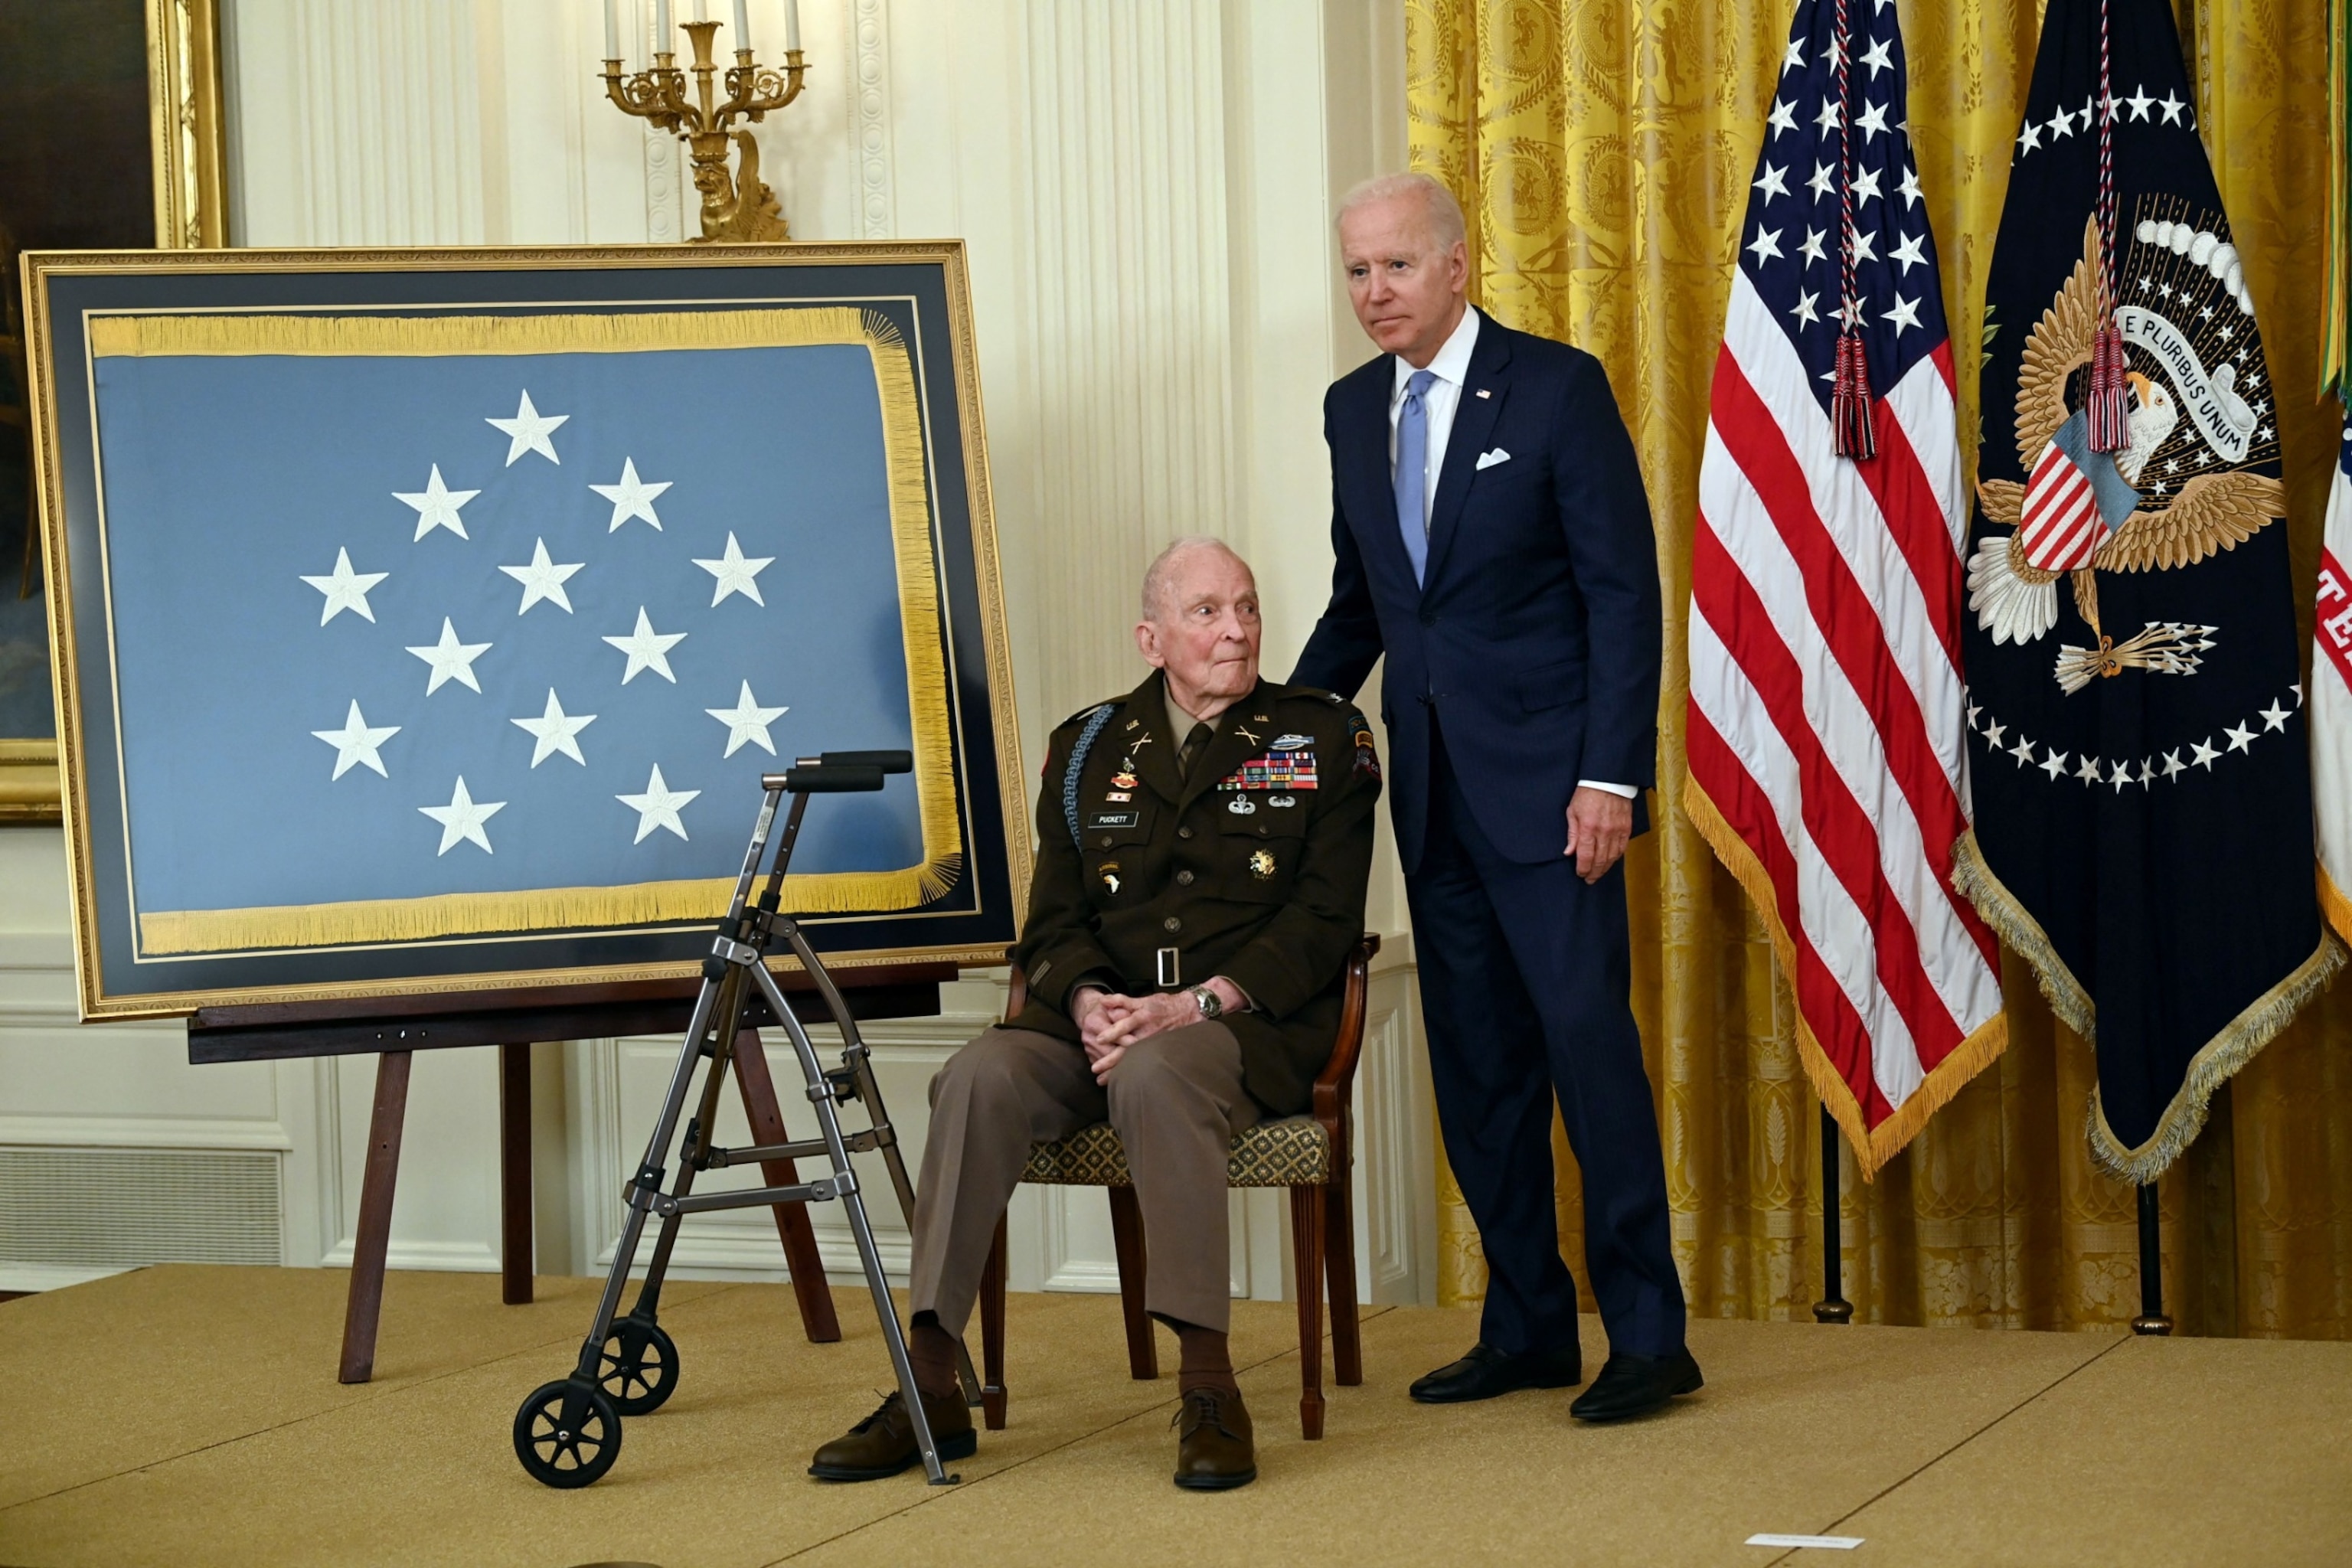 PHOTO: President Joe Biden stands next to 94-year-old retired Army colonel Ralph Puckett, Jr., before presenting him with the Medal of Honor for conspicuous gallantry while serving during the Korean War, in Washington, DC on May 21, 2021.